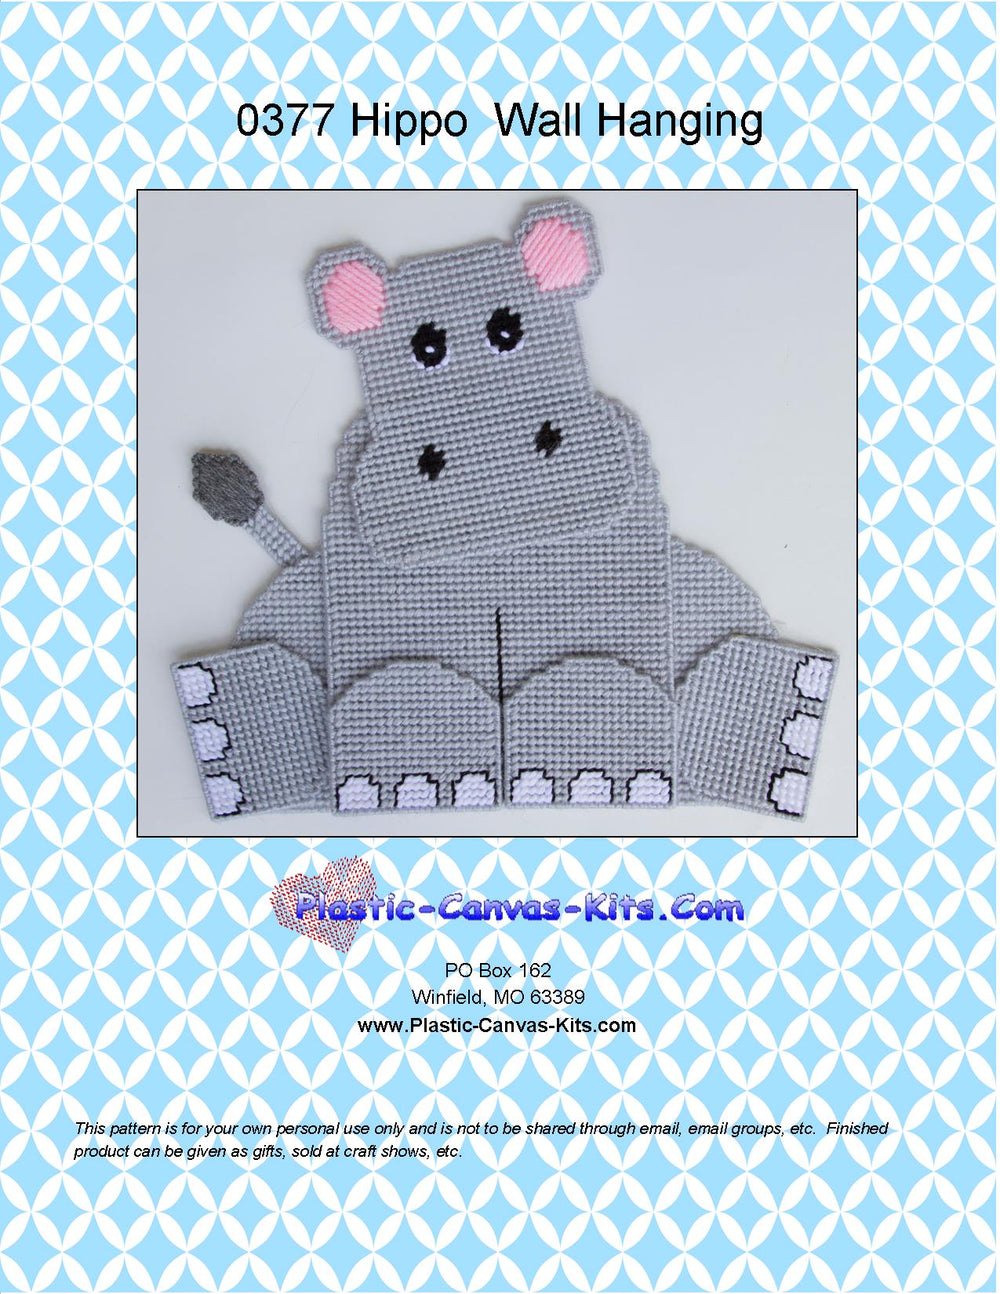 Hippo Wall Hanging